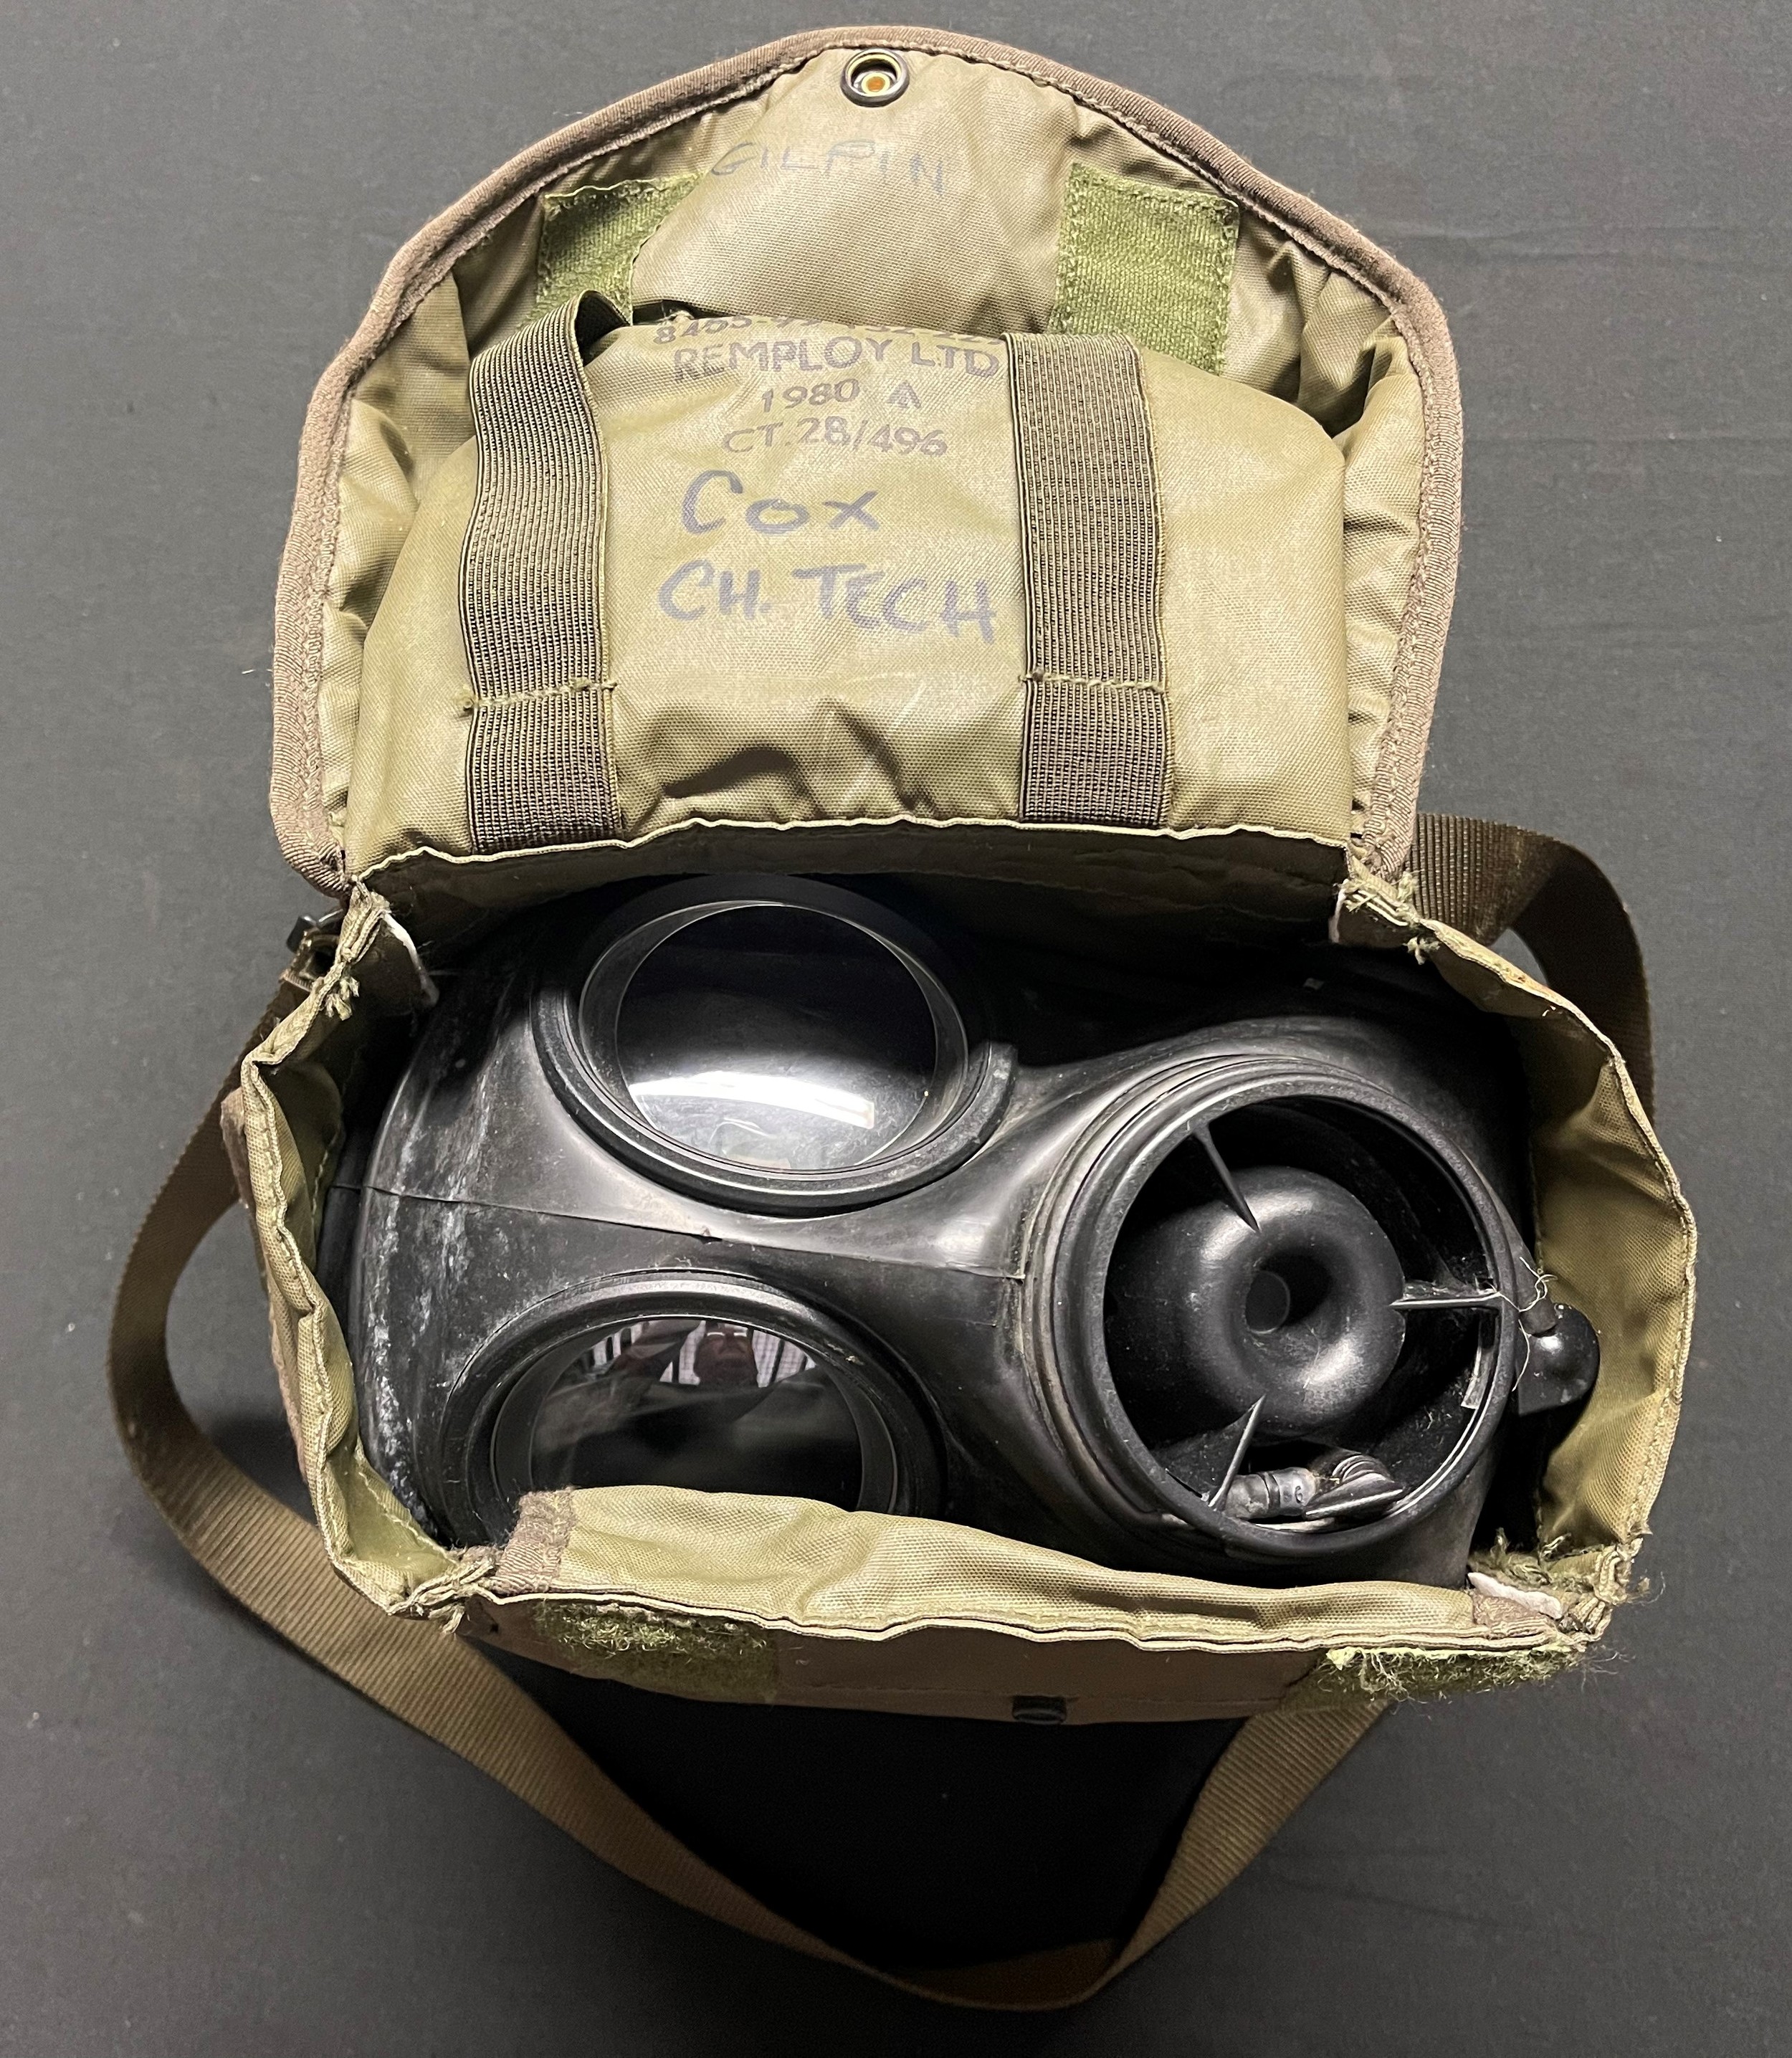 A British Army S10 Gas Mask complete in PLCE bag with Spare filters